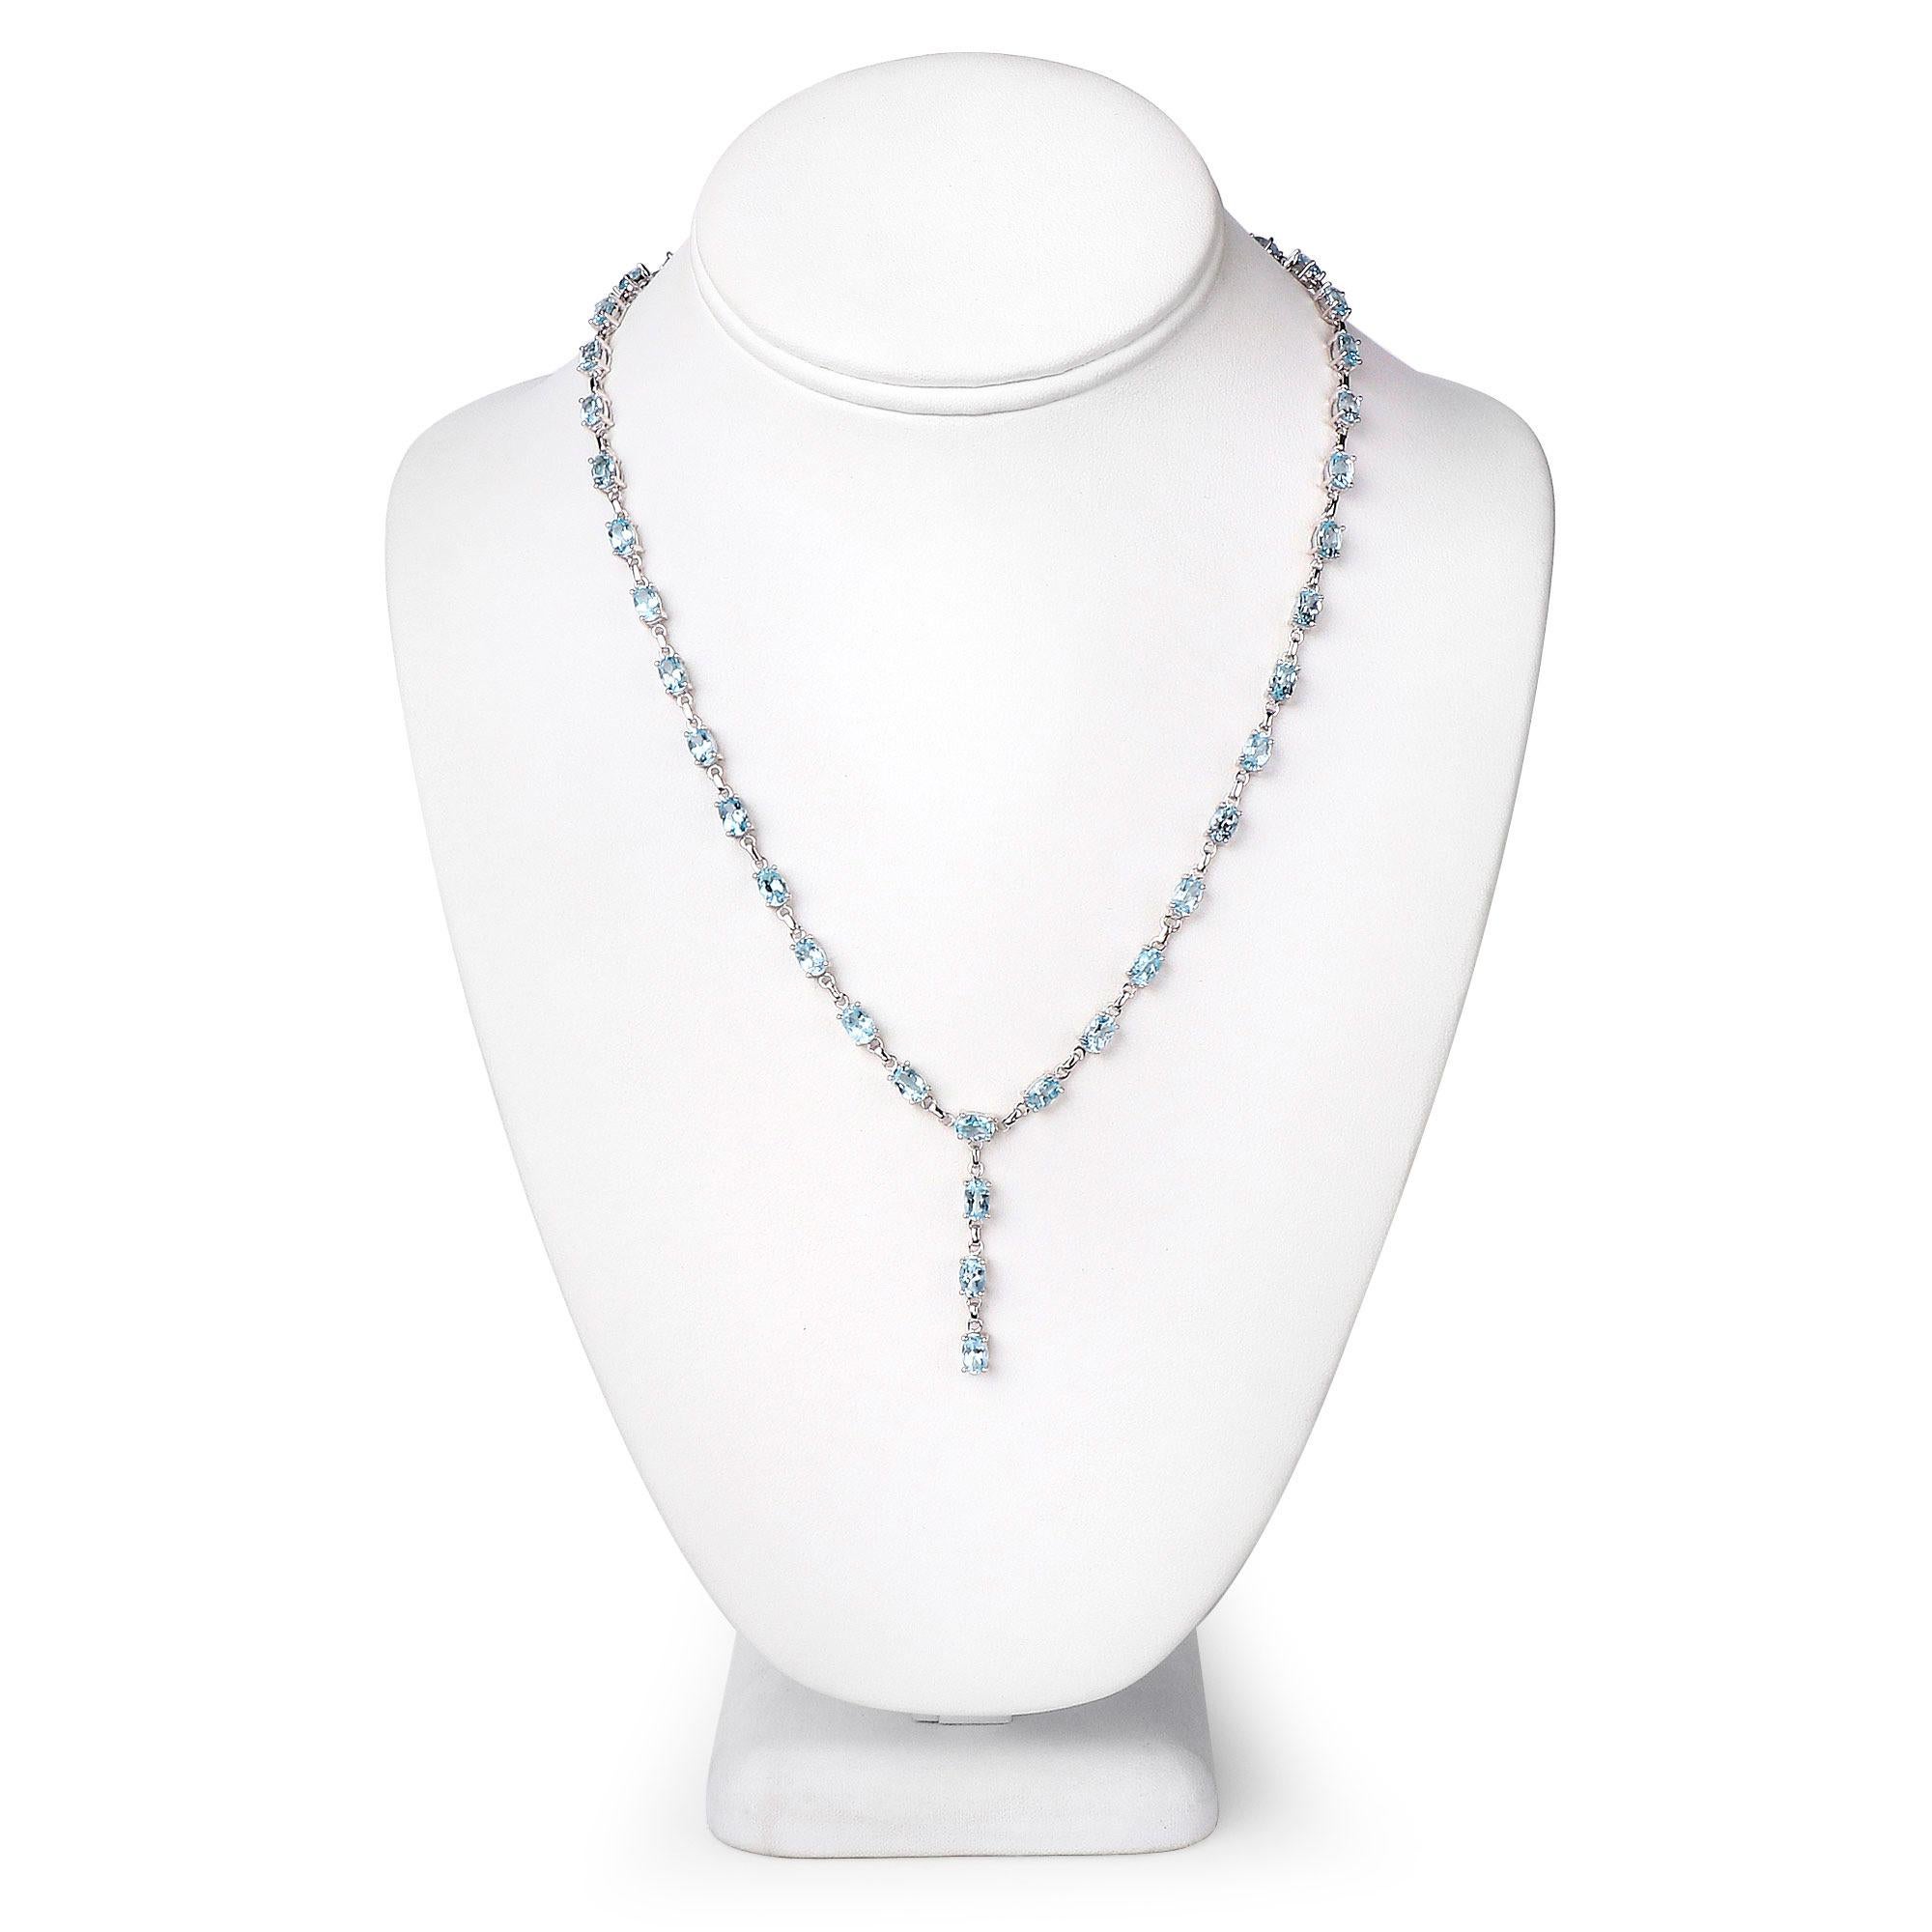 Blue Topaz Drop Necklace 23 Carats Sterling Silver In Excellent Condition For Sale In Laguna Niguel, CA